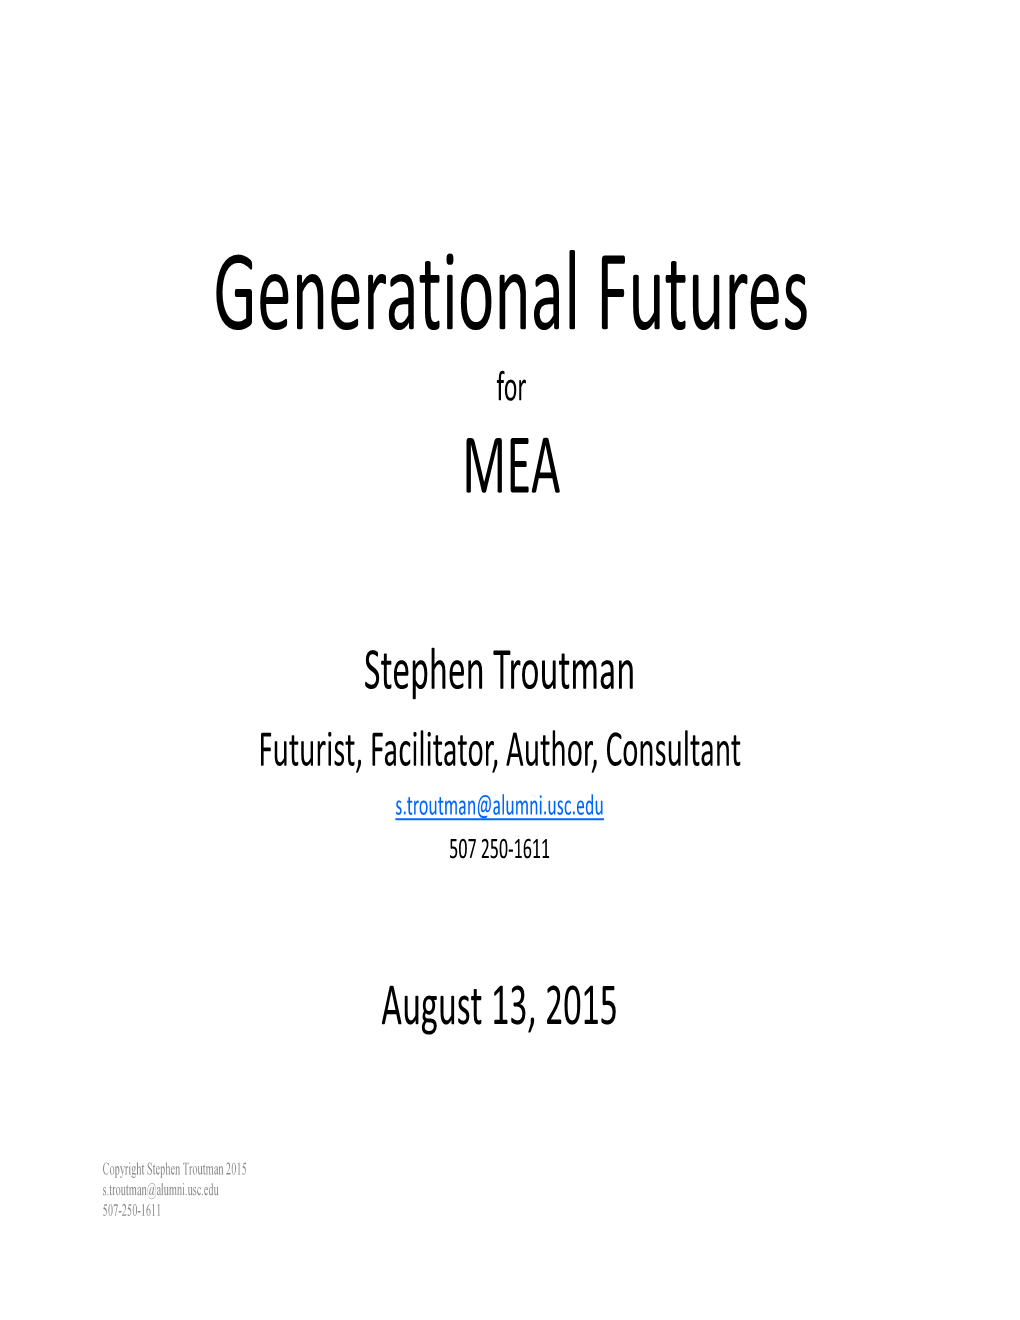 Generational Futures for MEA